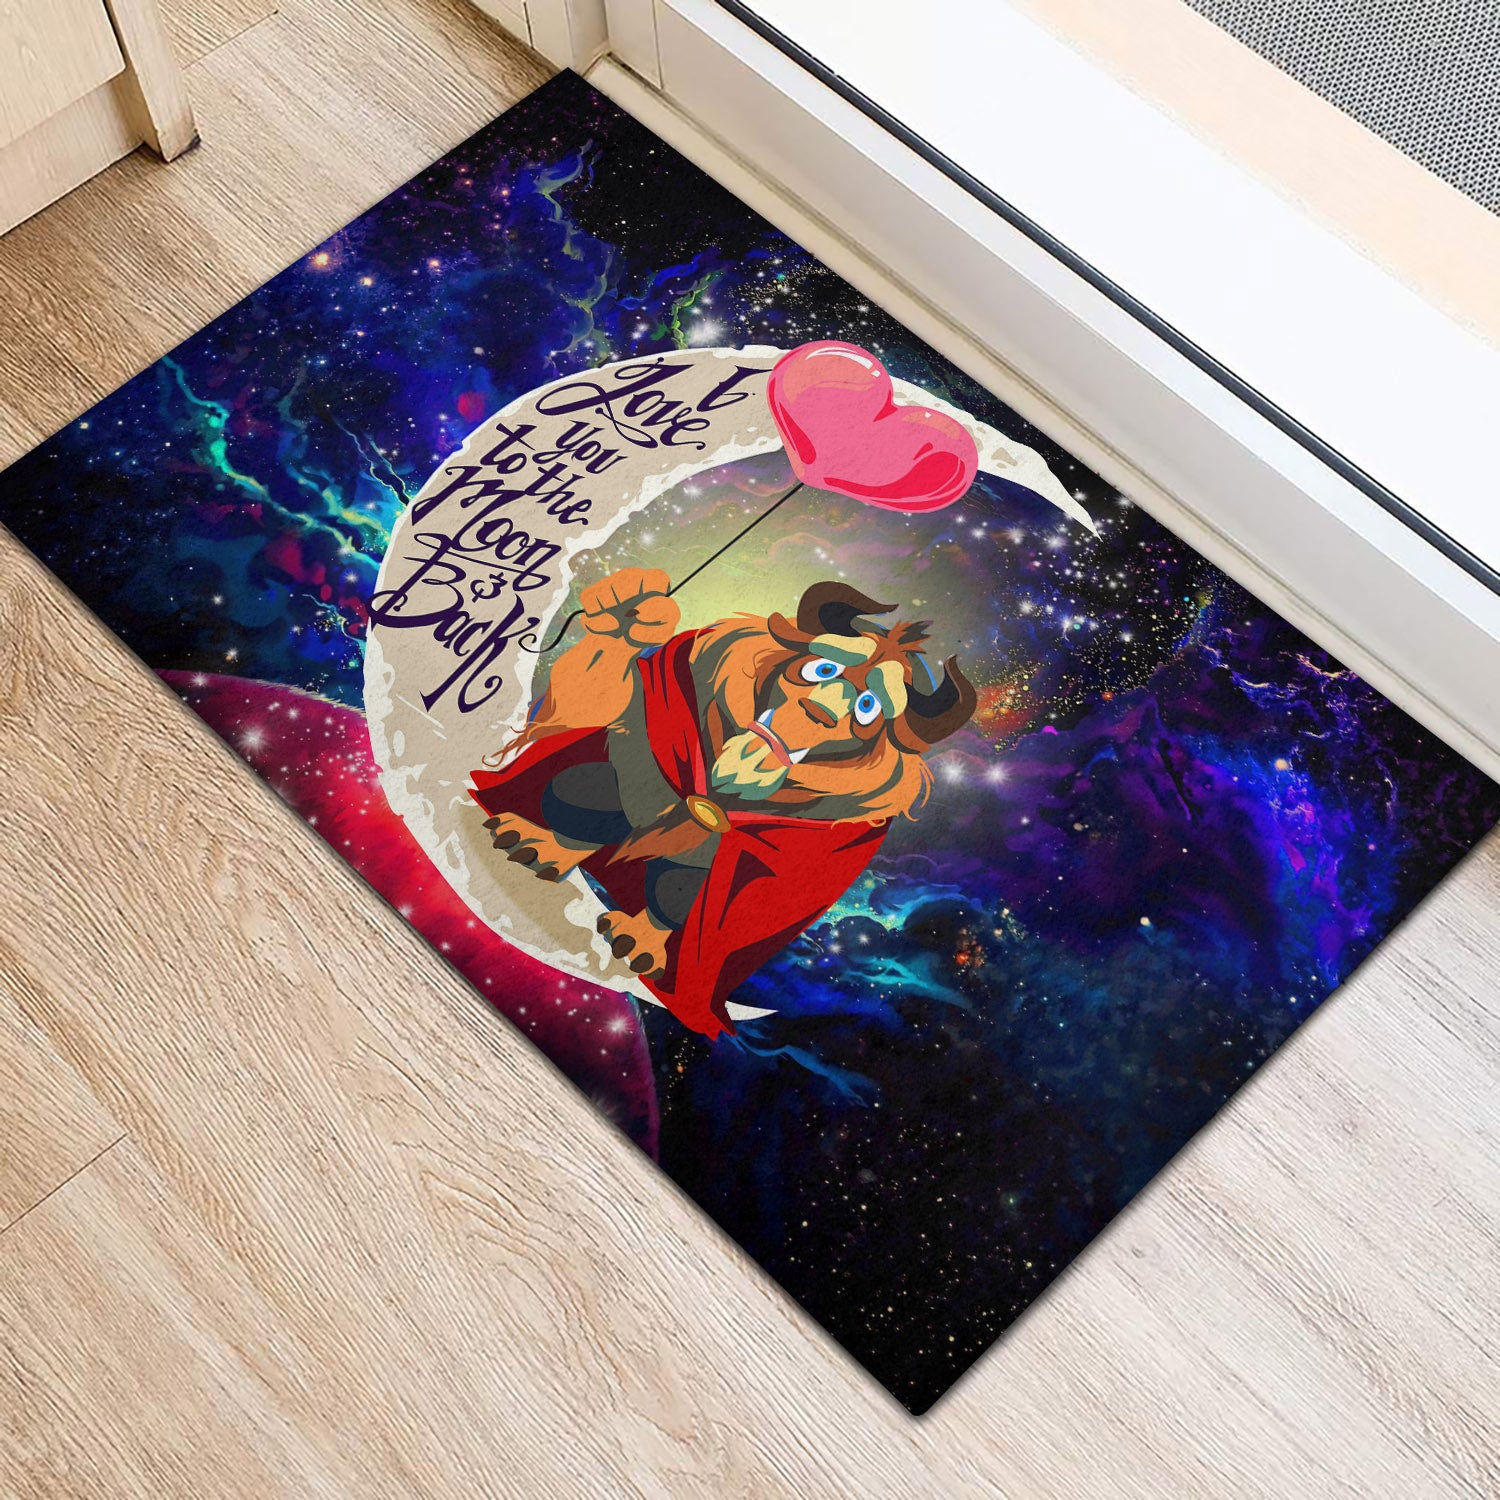 Beauty And The Beast Love You To The Moon Galaxy Back Door Mats Home Decor